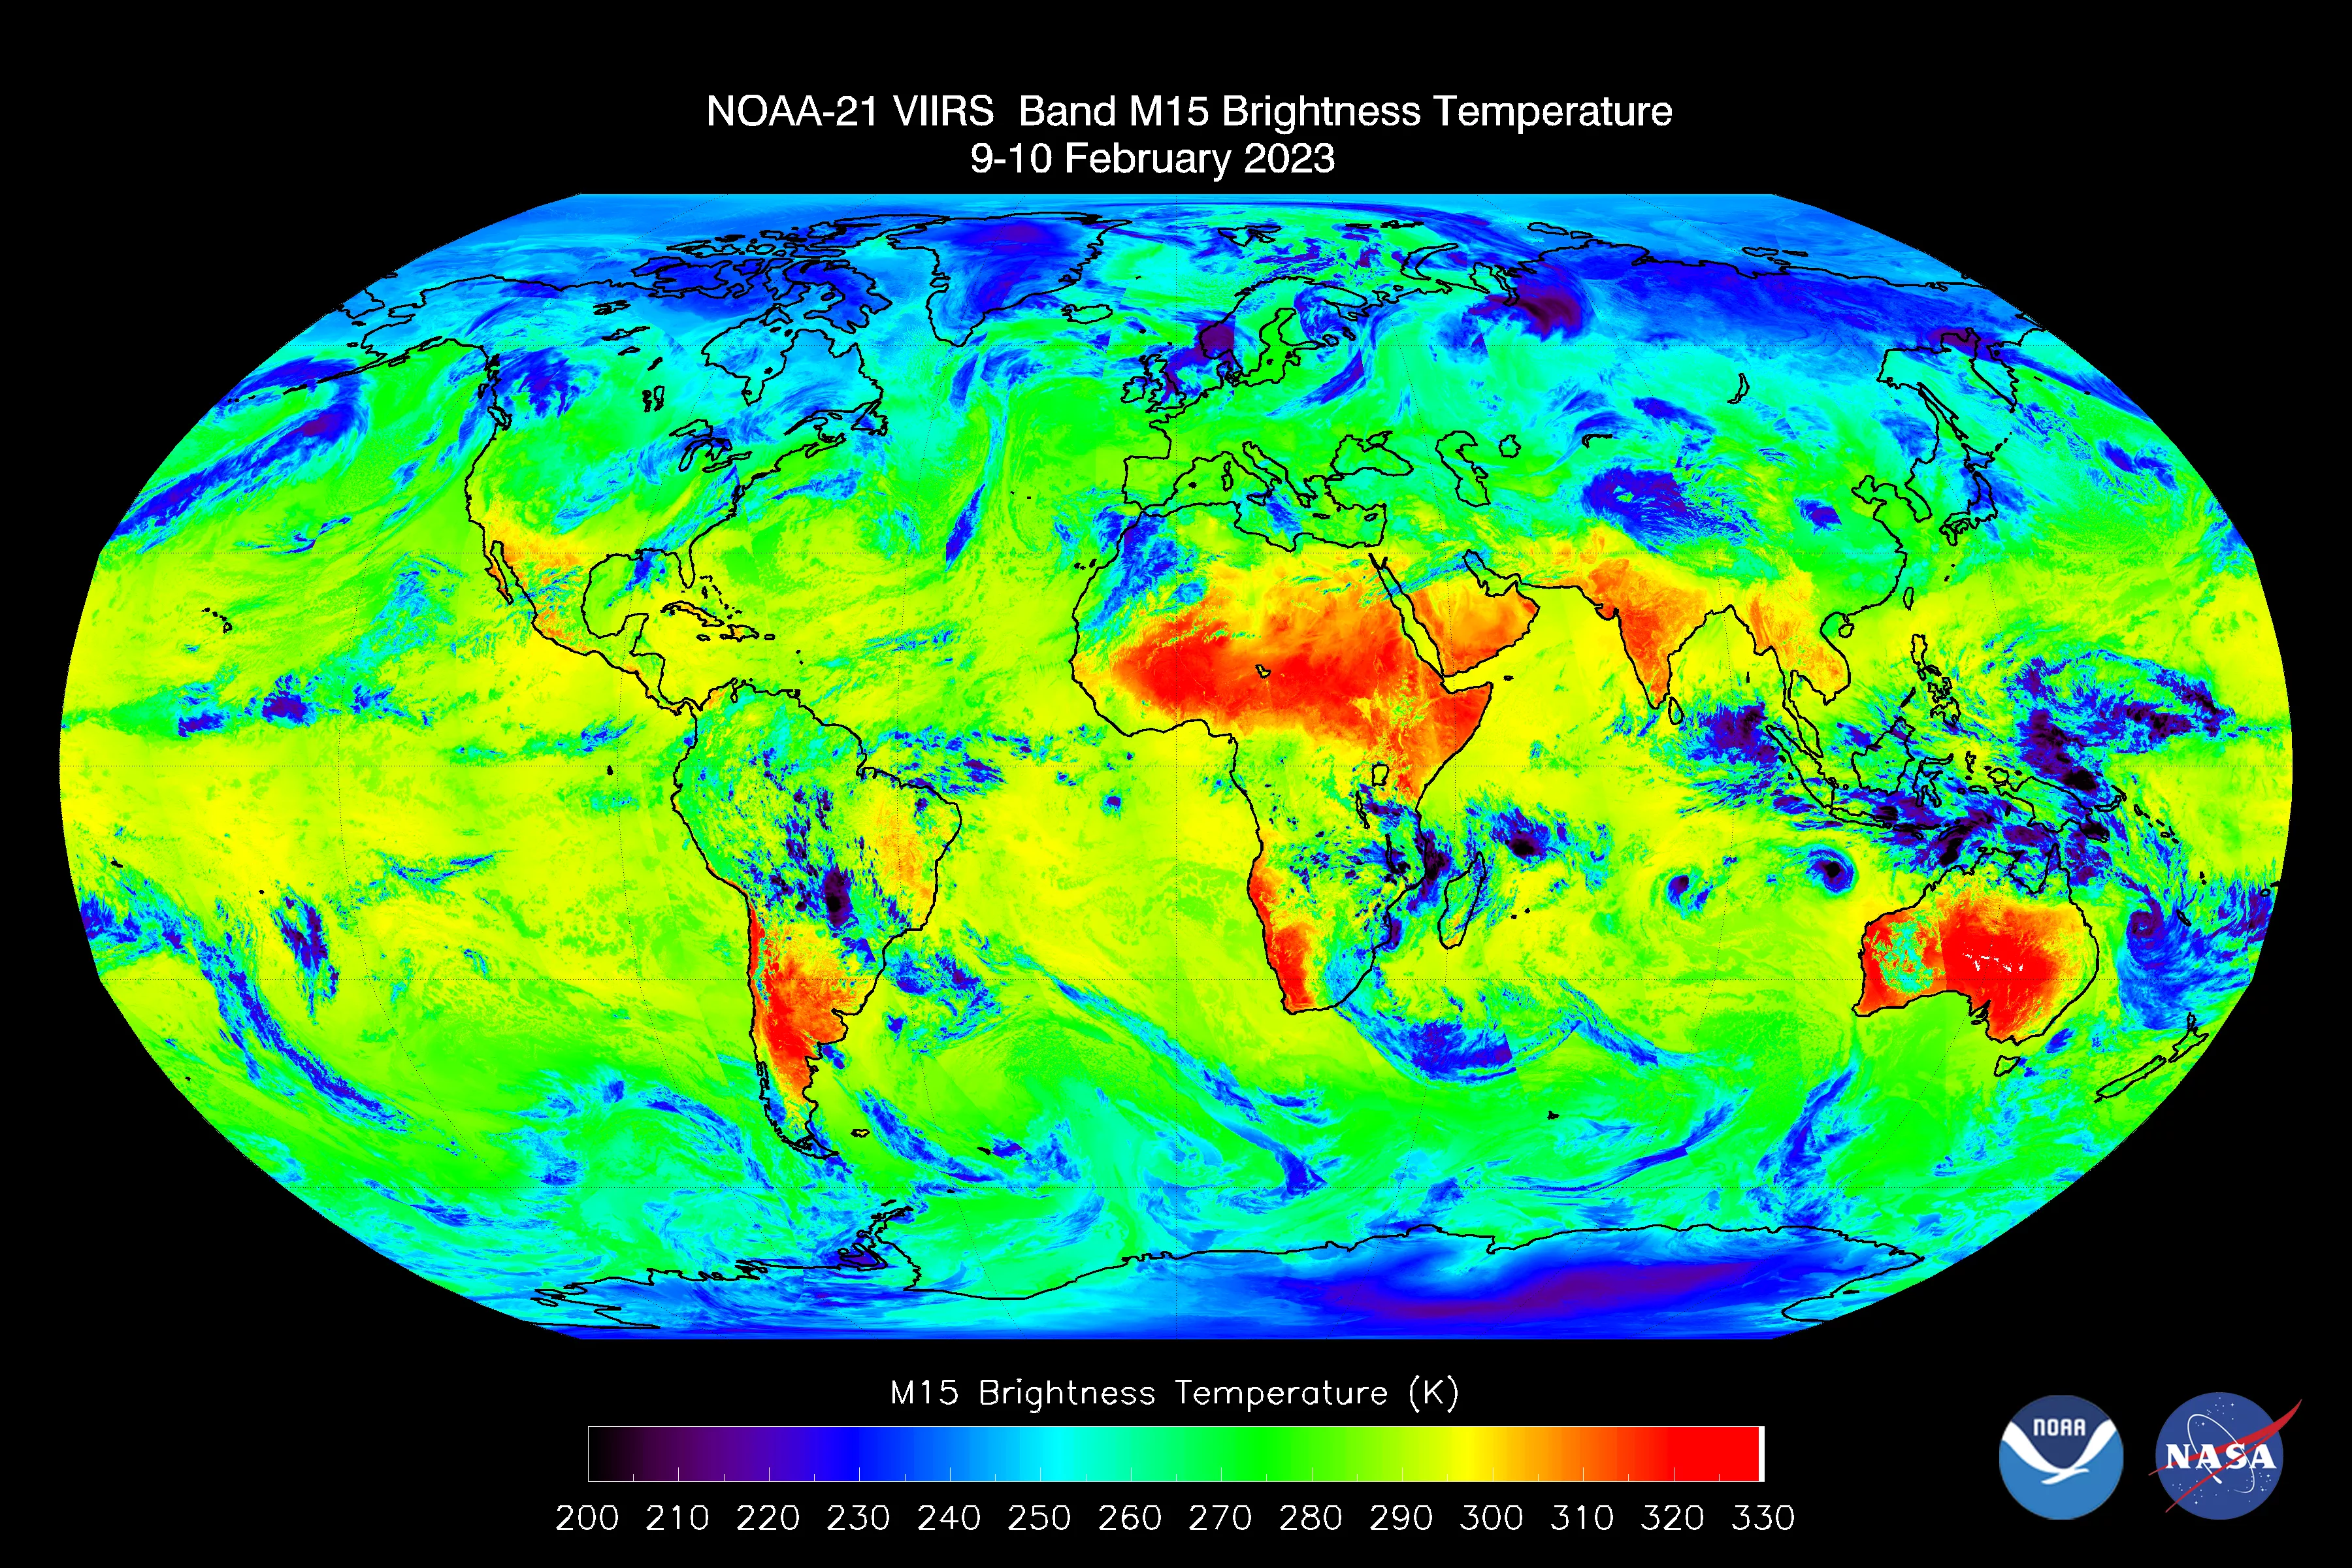 First light imagery from the thermal emissive band on NOAA-21 satellite's VIIRS sensor.